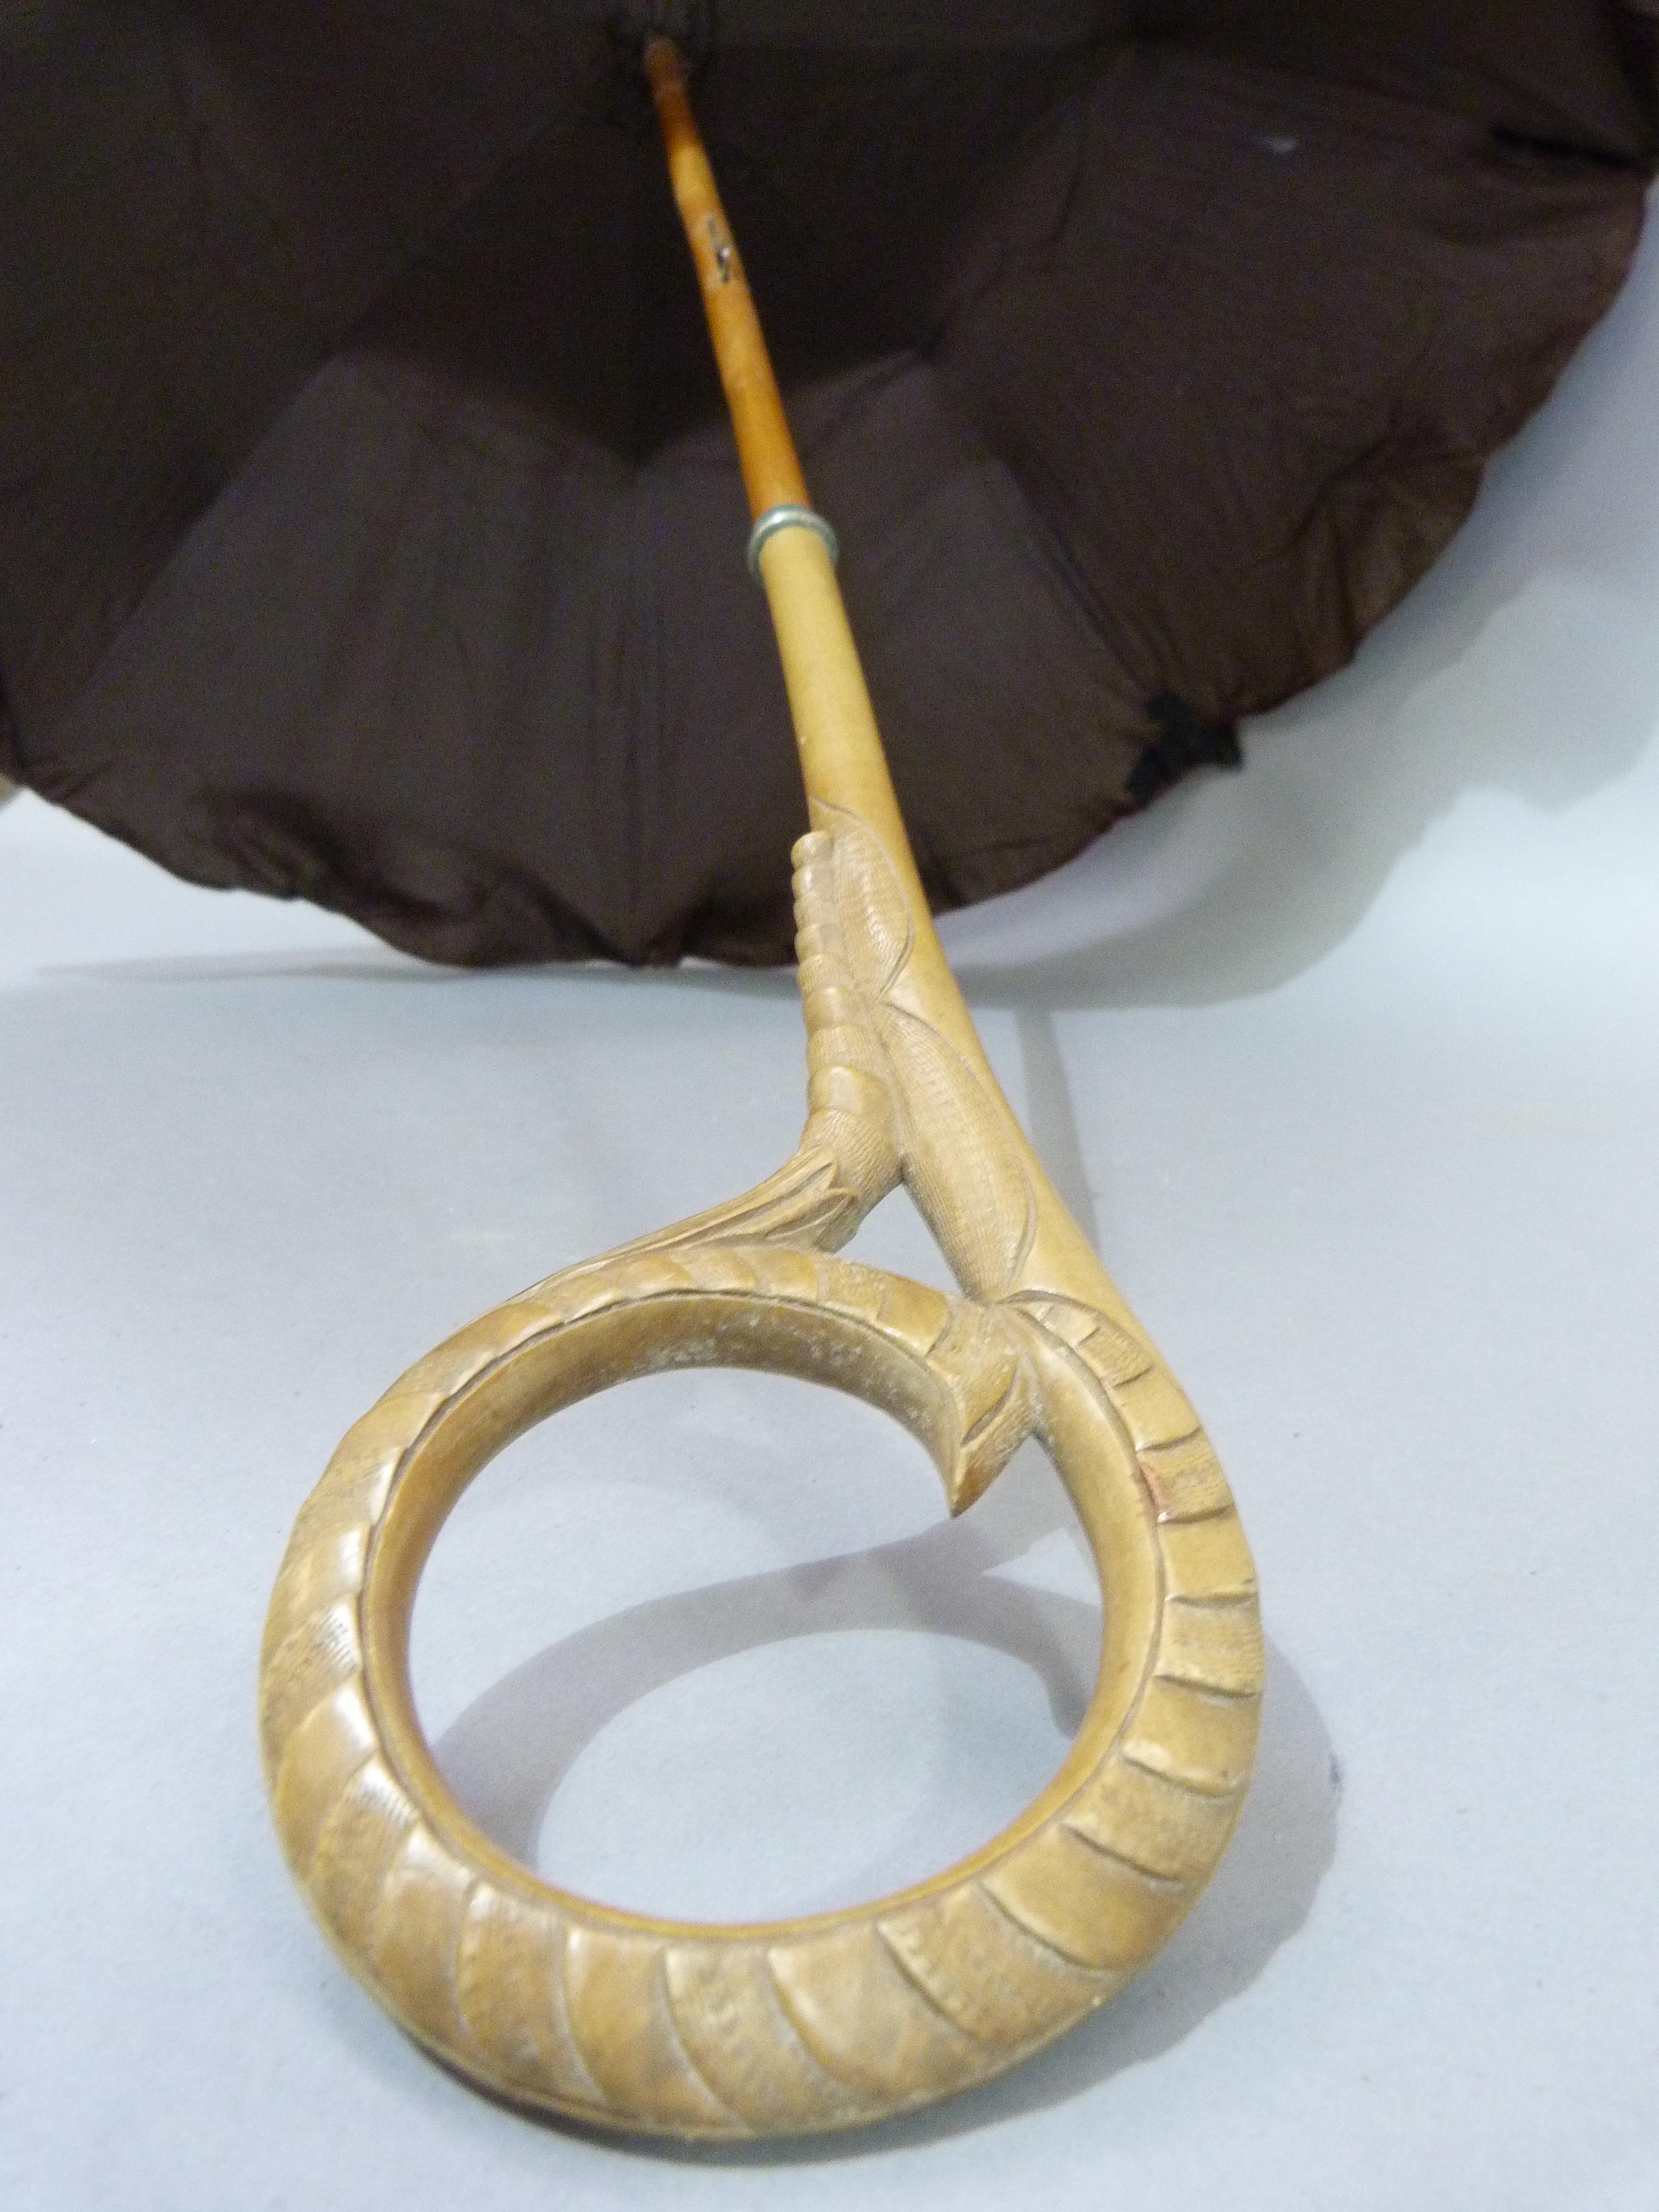 A Late Victorian aubergine satin parasol, the handle finely carved in a loop - Image 2 of 3